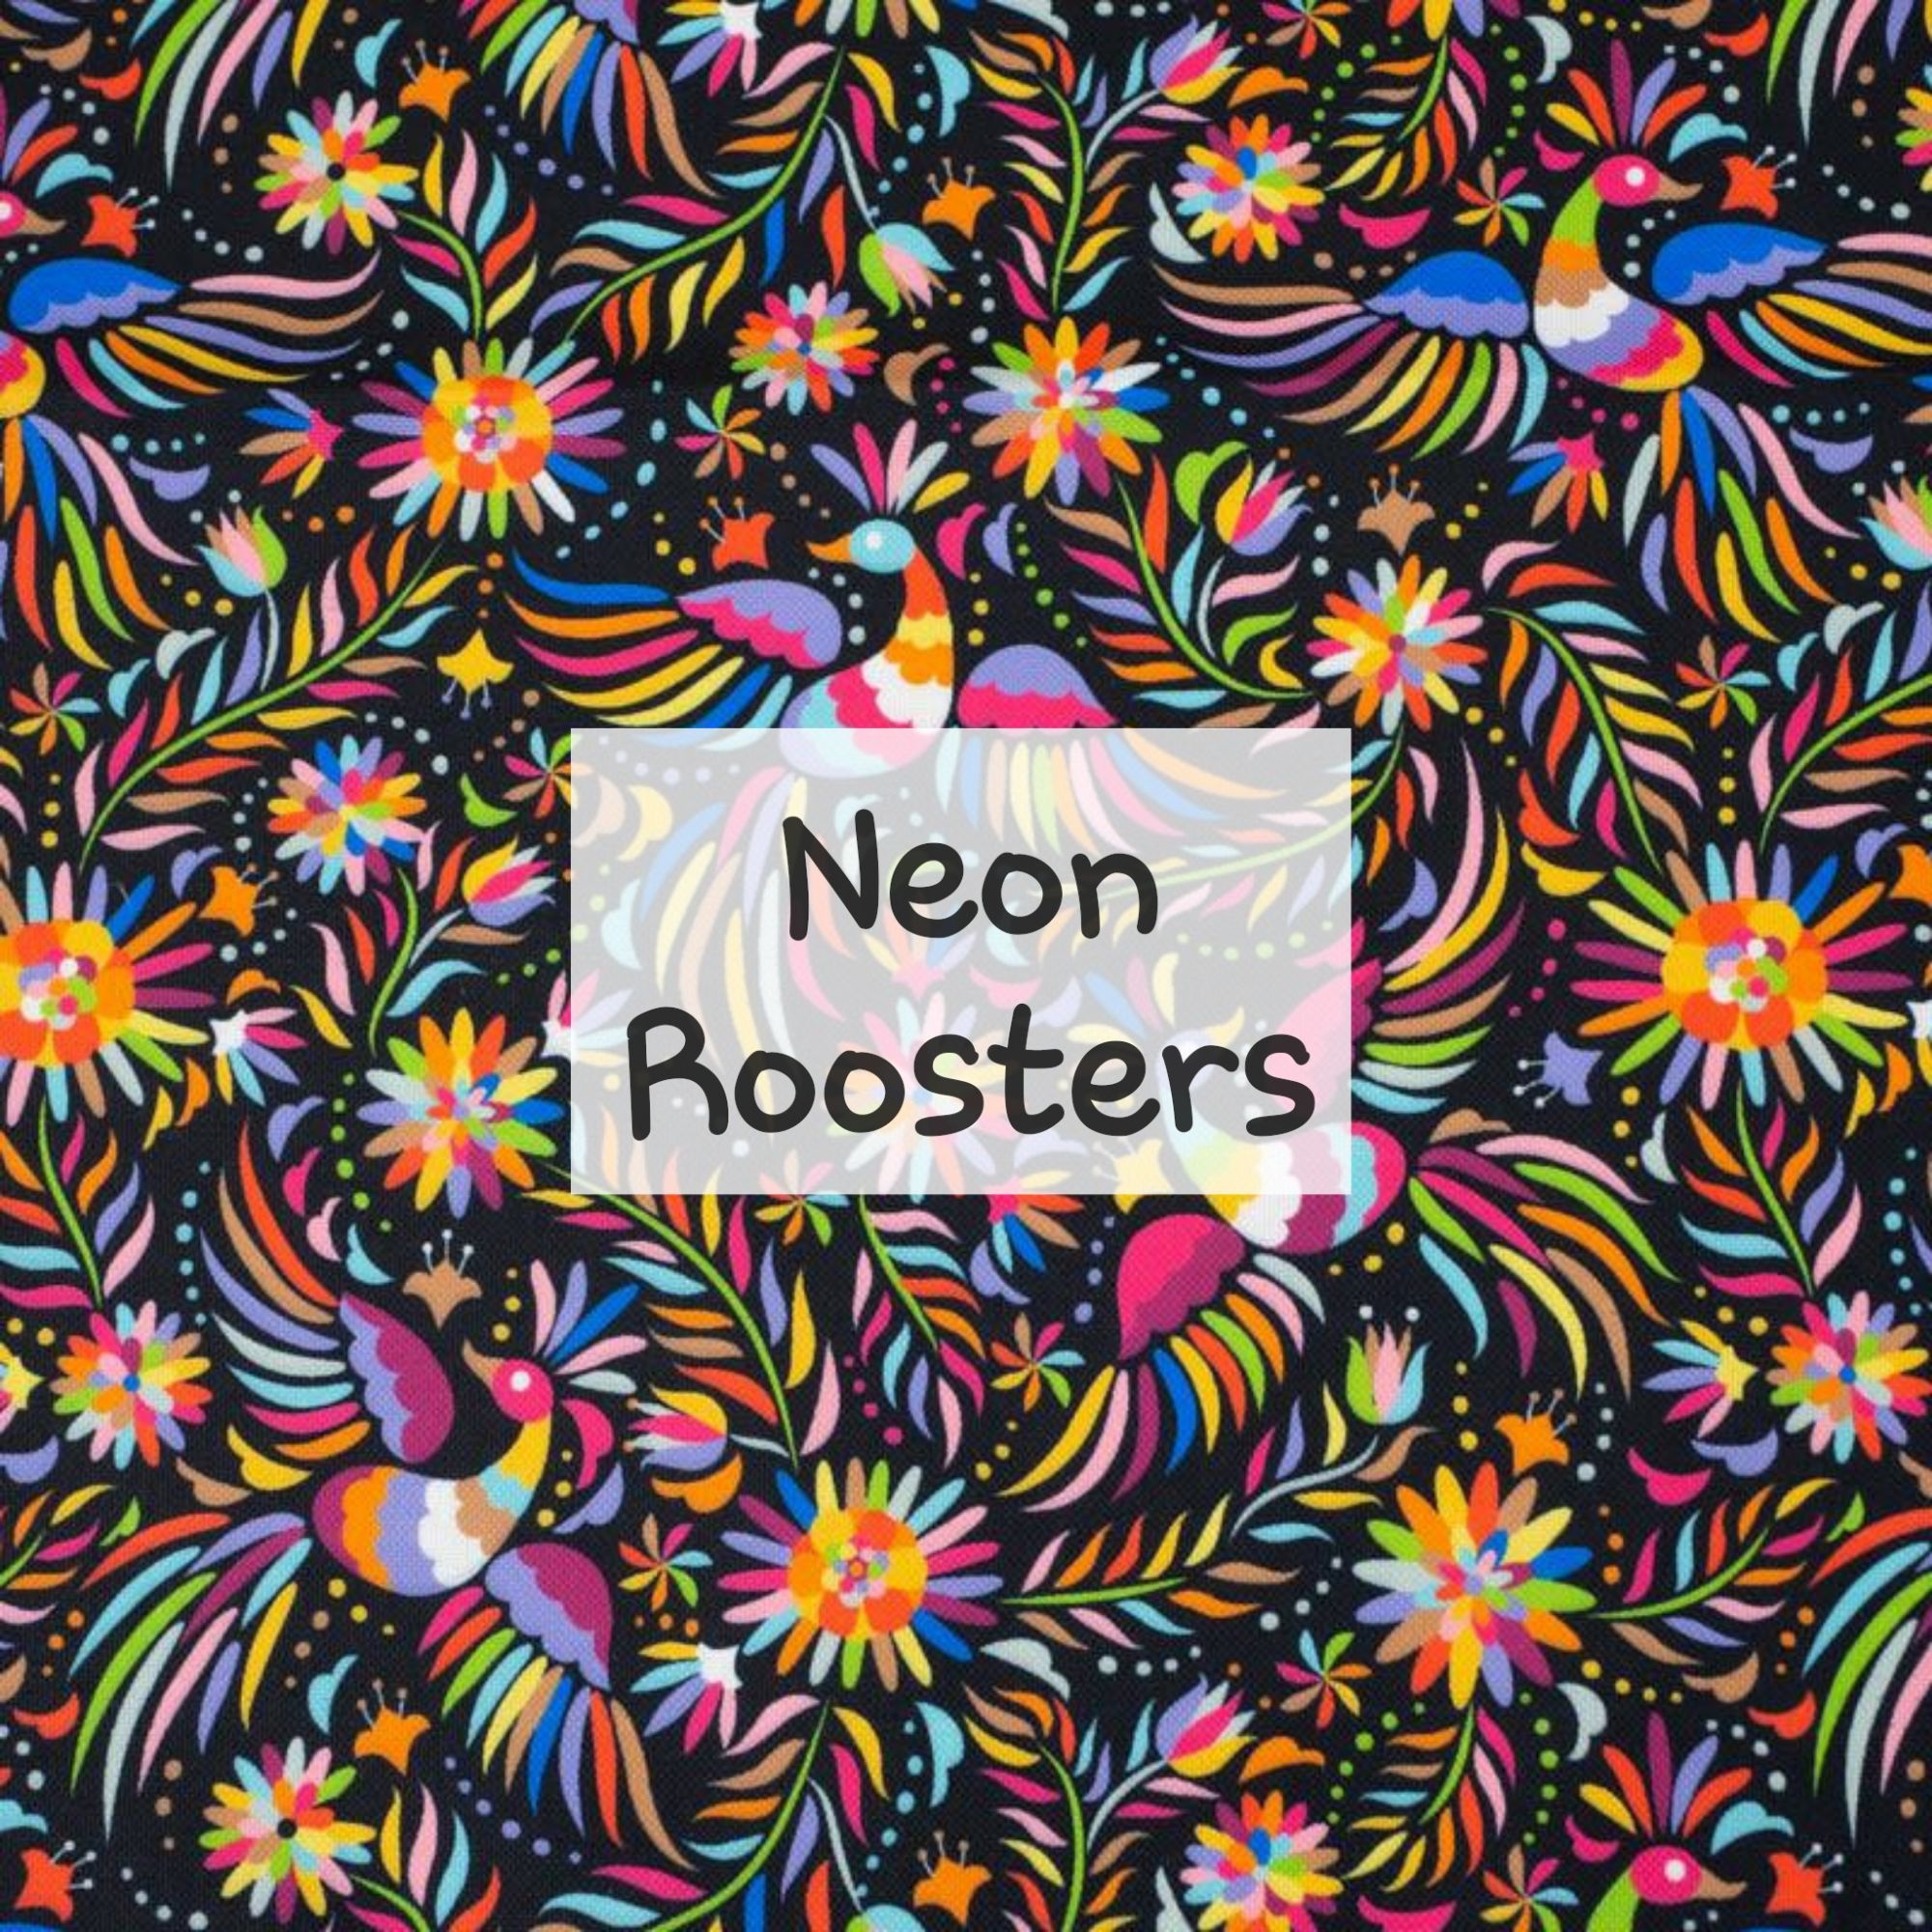 Neon Roosters